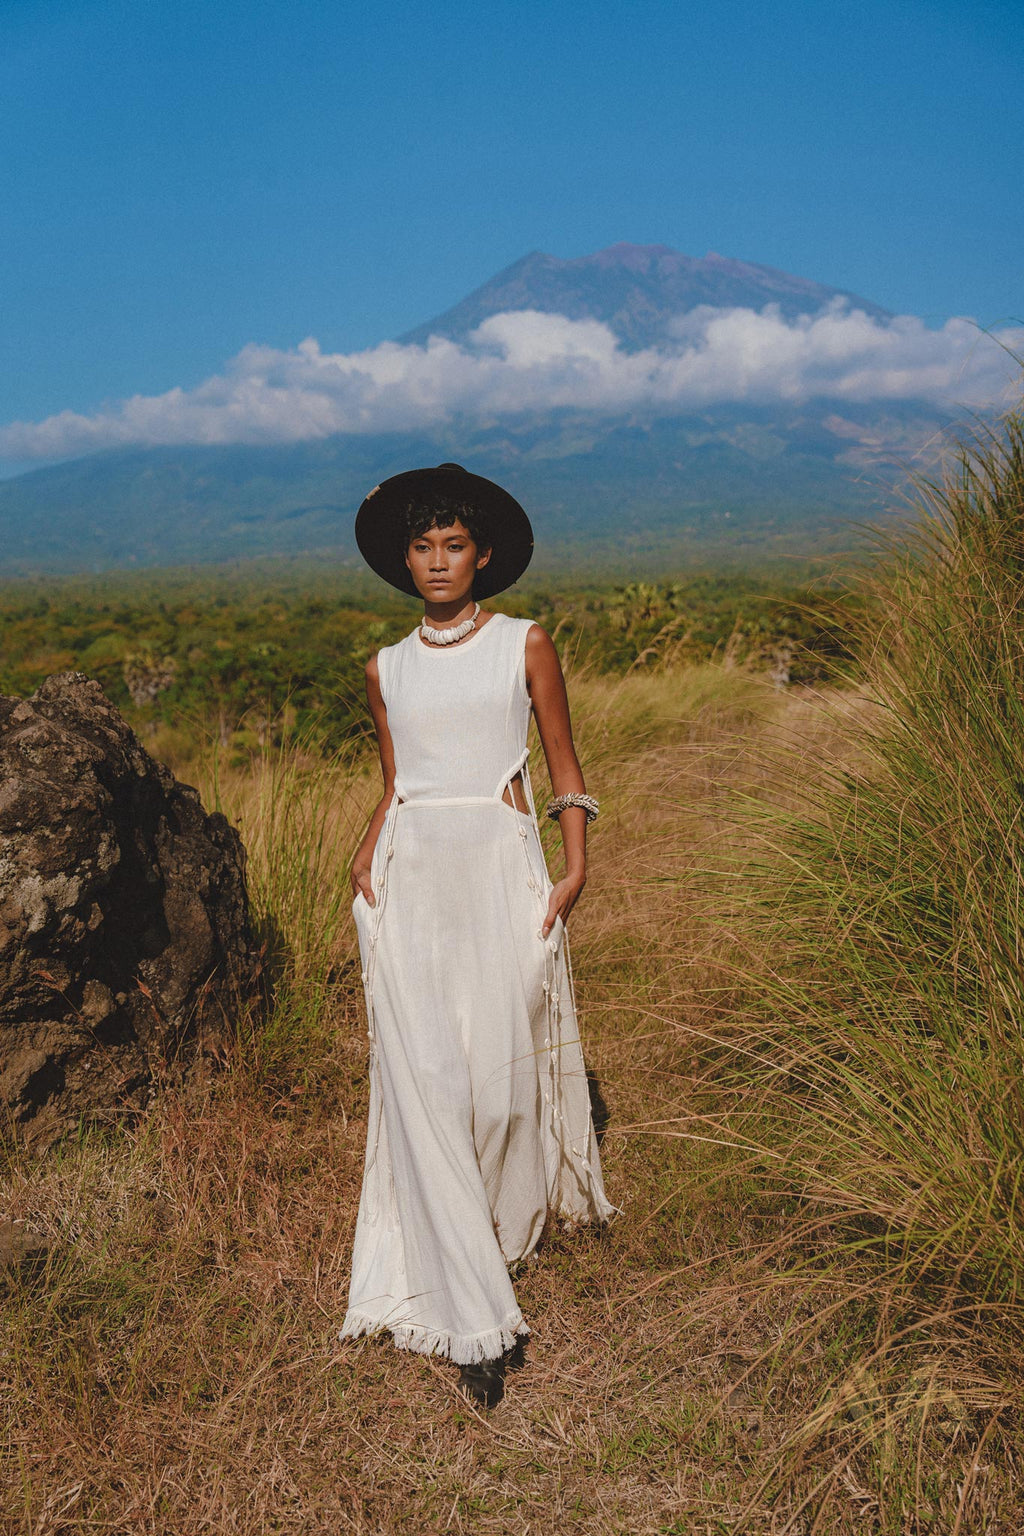 Keep cool in style with Aya Sacred Wear's Off White Macrame Summer Dress